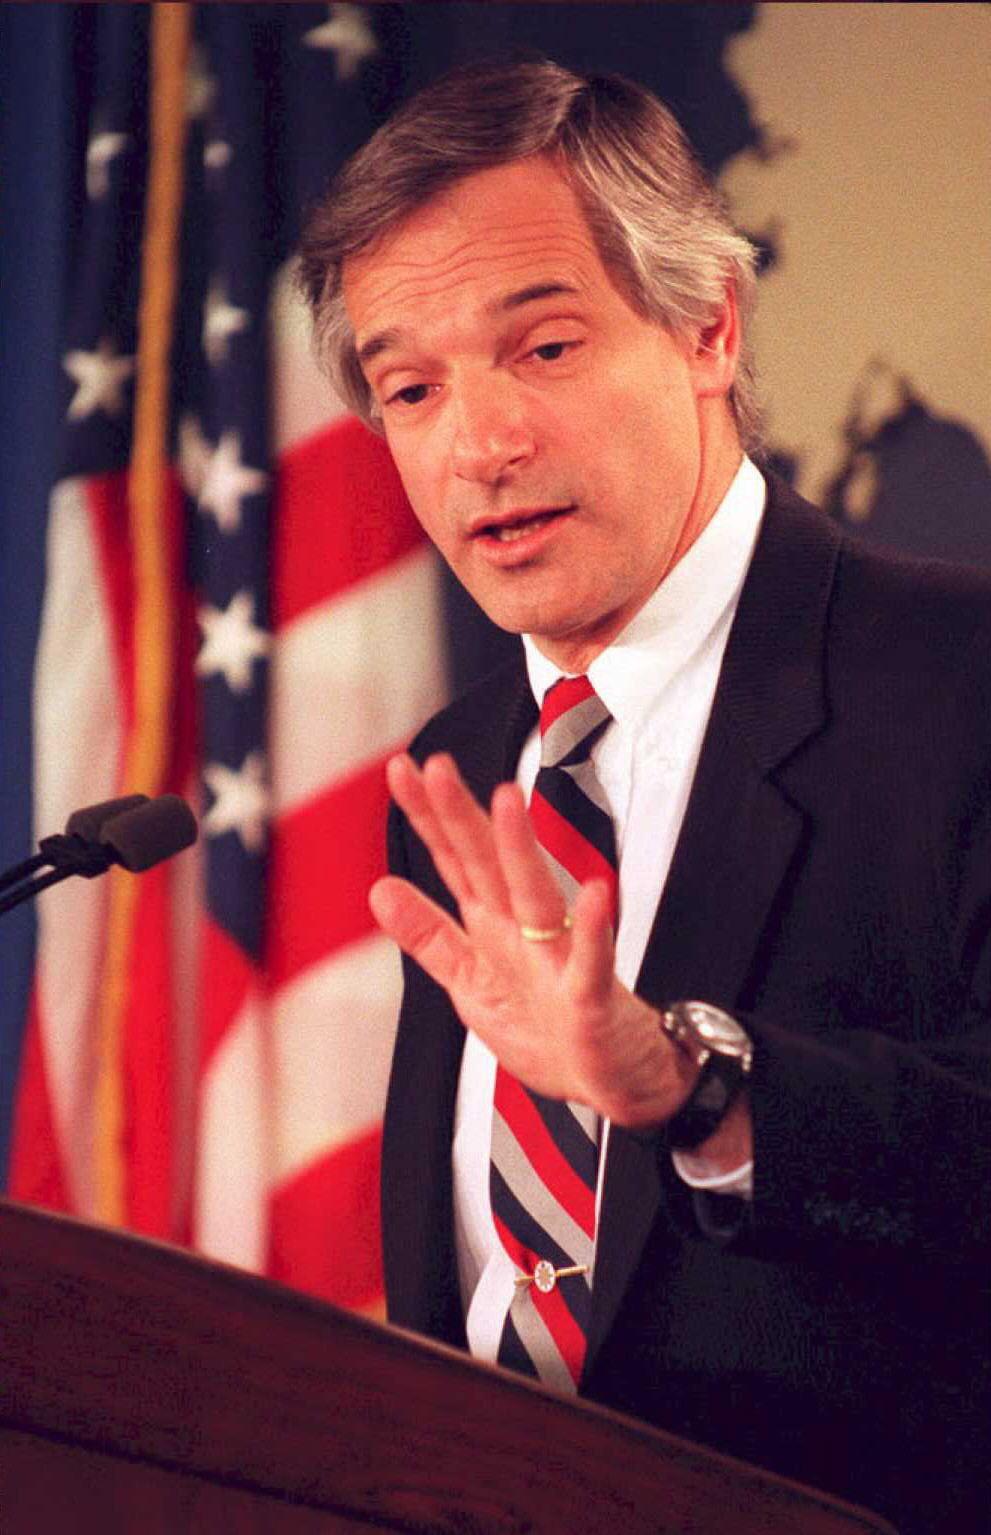 U.S. roving ambassador Robert Gallucci discusses the formation of a corporation to provide North Korea with nuclear reactors during a March 1995 event at the US State Department. Gallucci was central to the 1994 deal to stop North Korea from developing nuclear weapons. (Joshua Roberts/AFP/Getty Images)